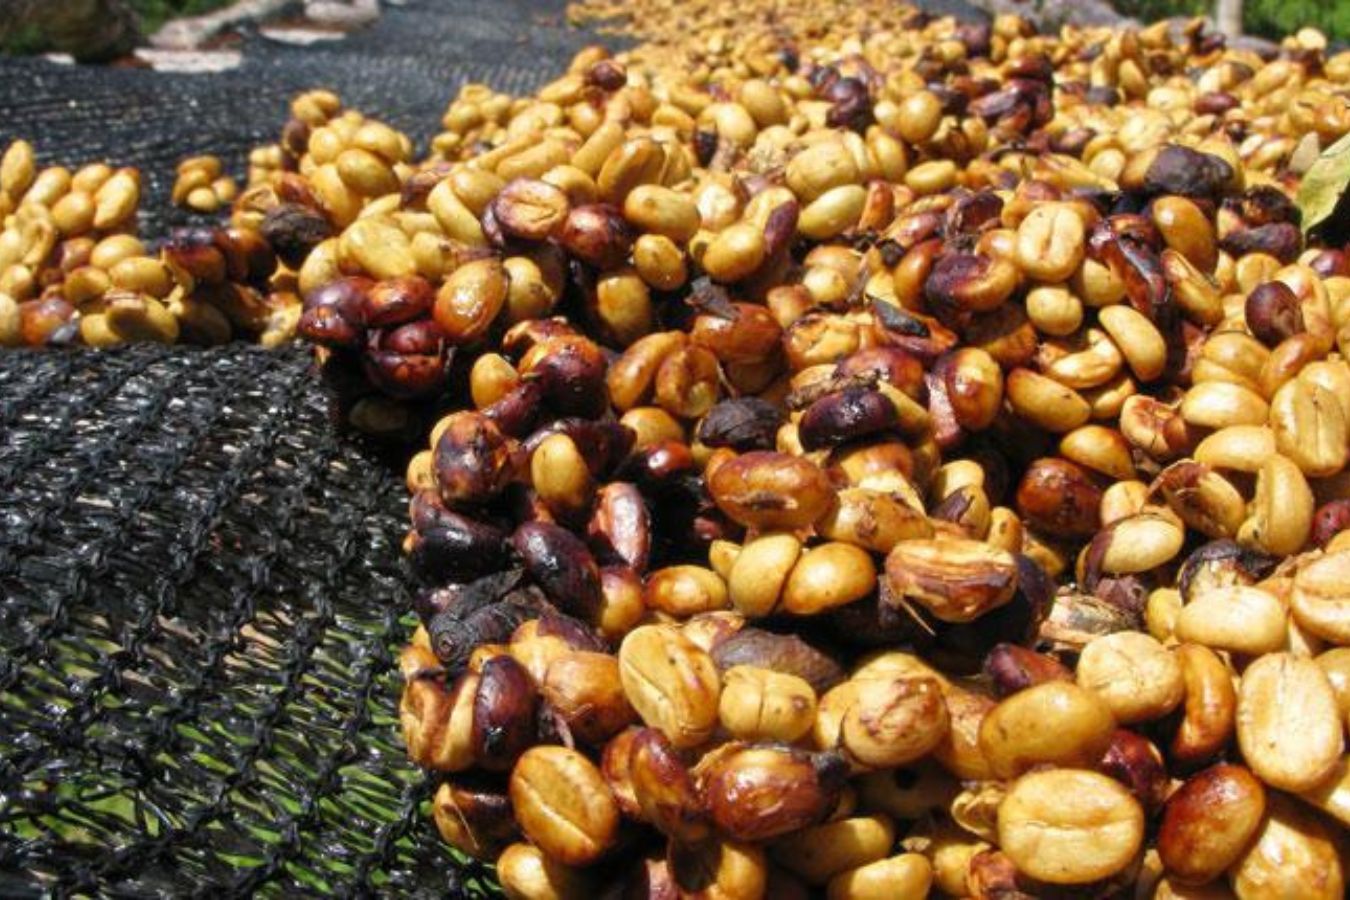 Honey Coffee Beans Price Higher Than Dry Coffee Beans